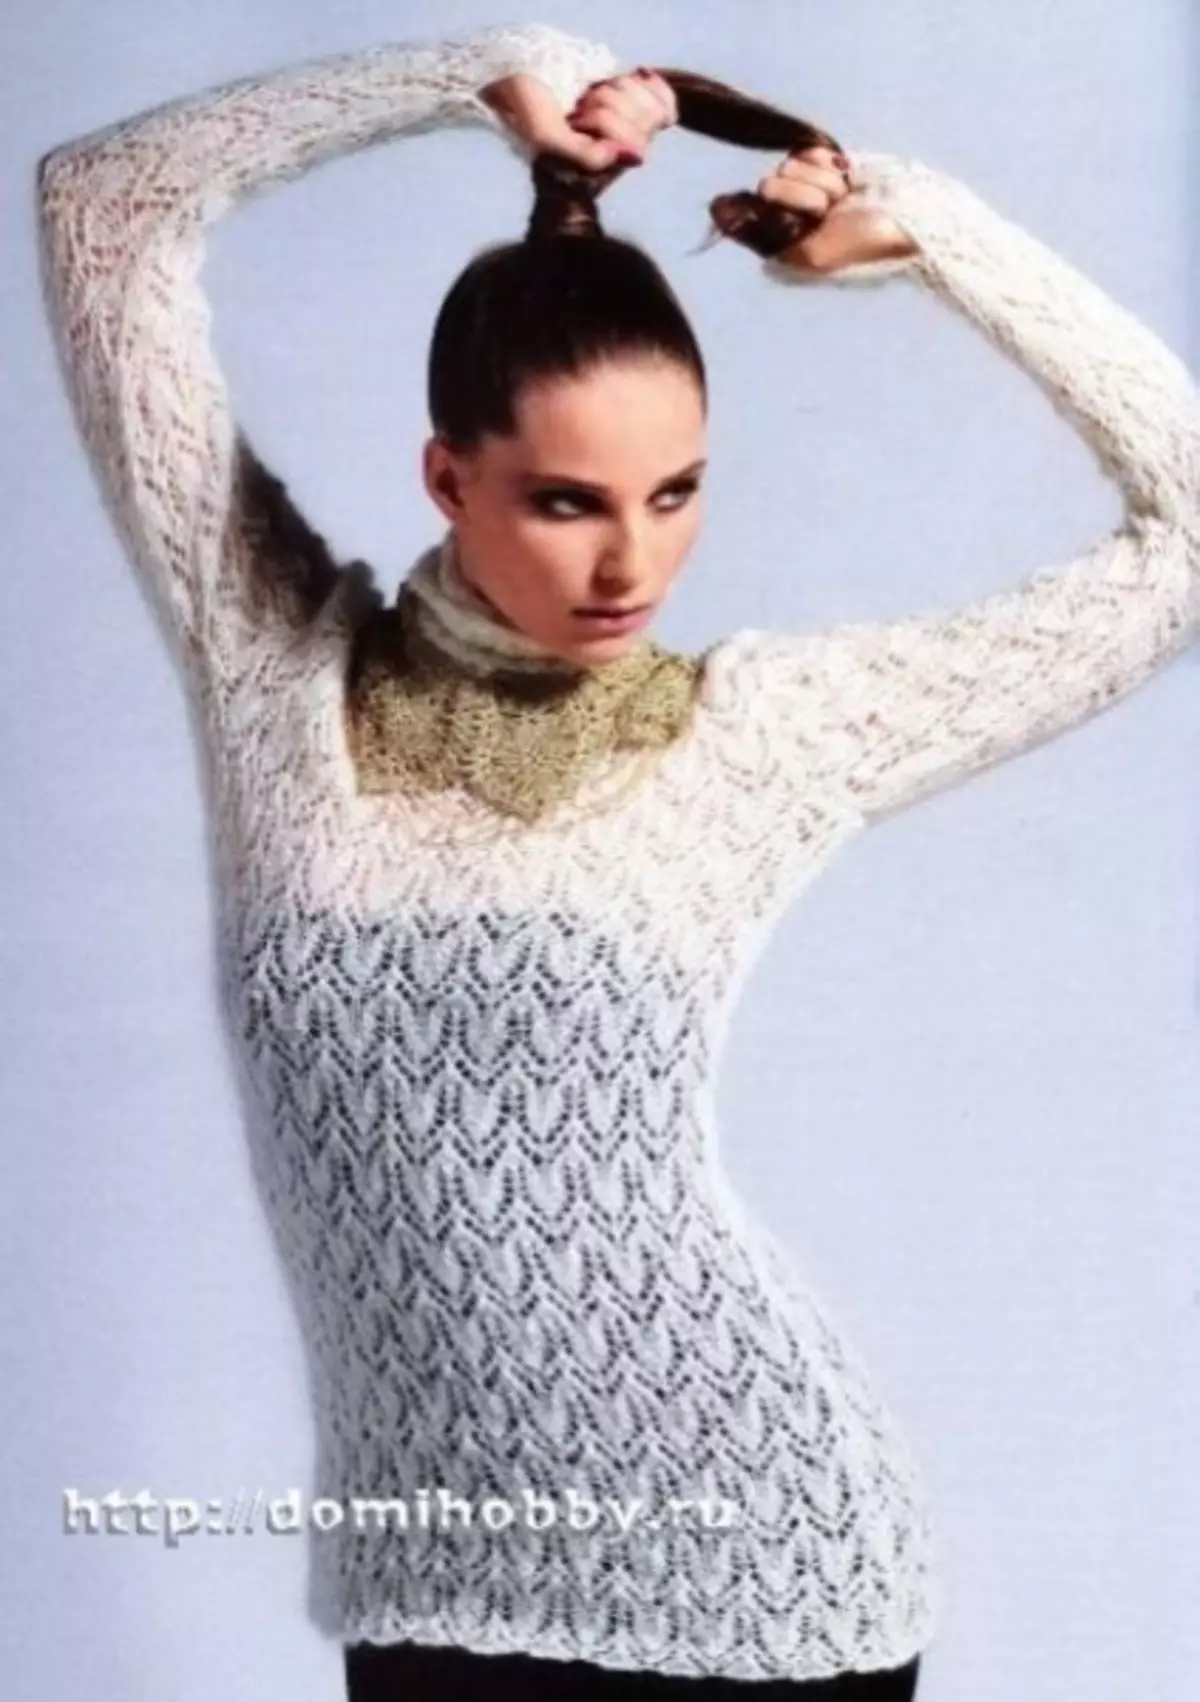 Openwork sweater knitting needles for women with description, photo and video